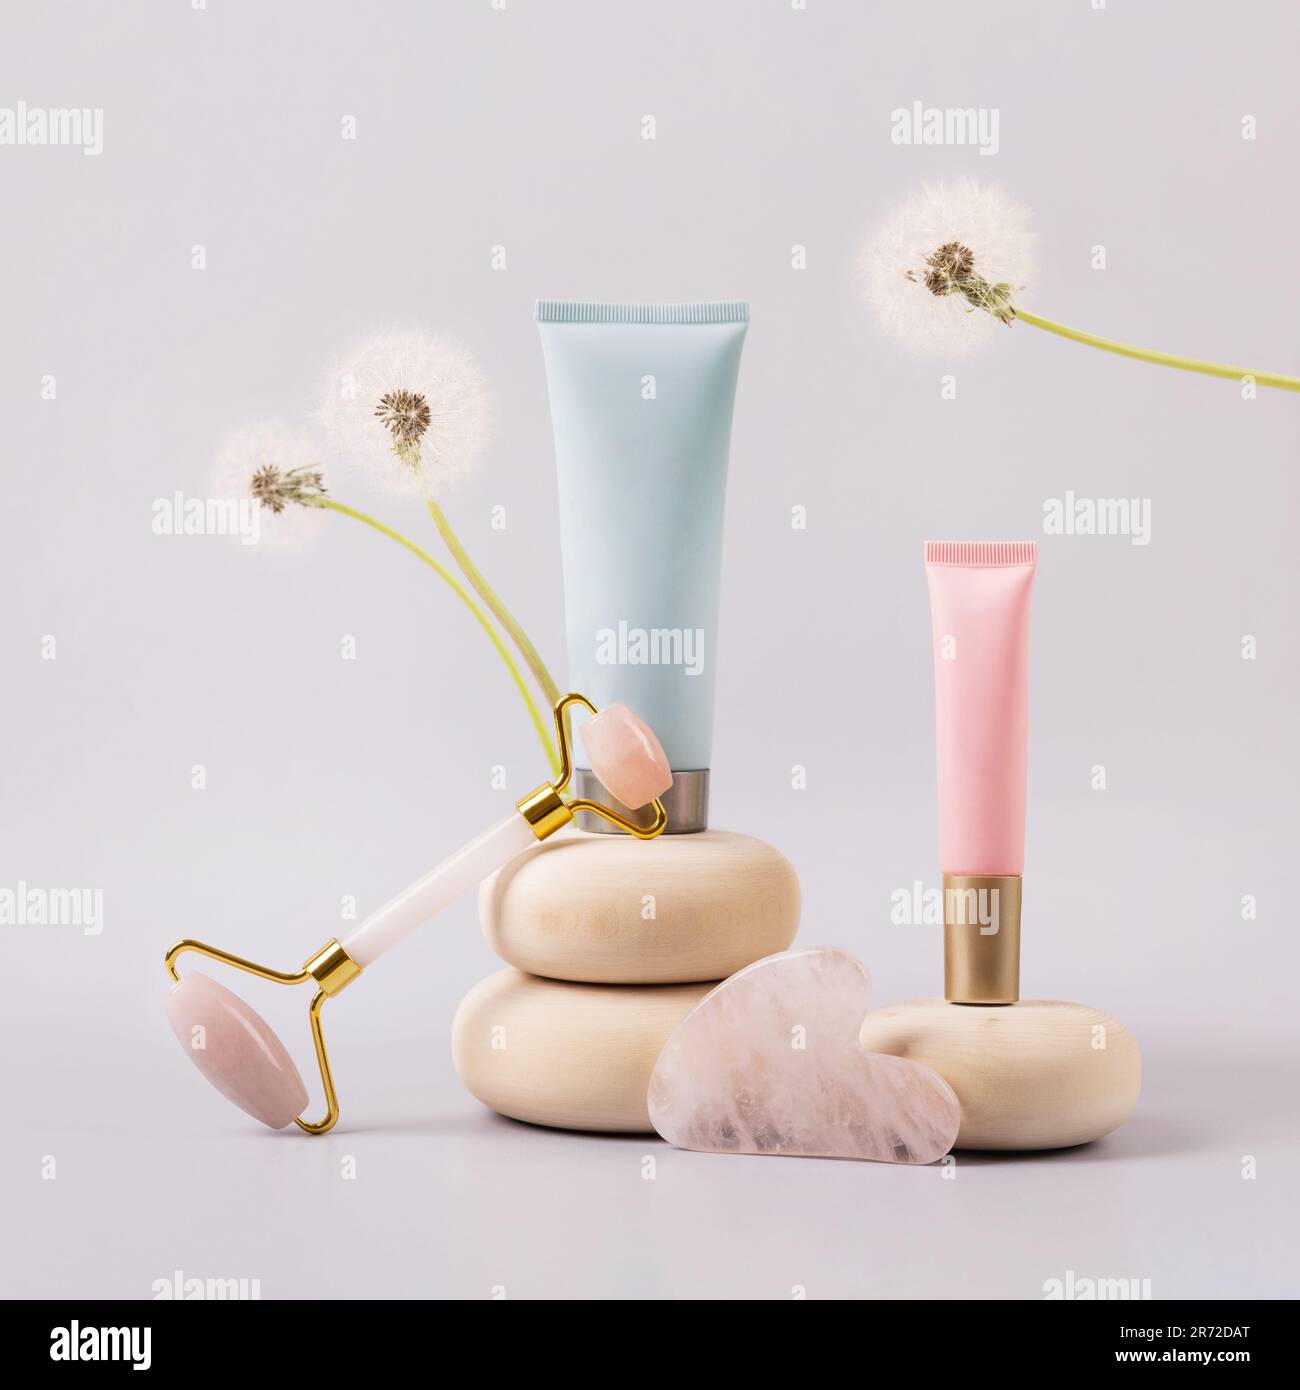 Facial anti-age massage for natural lifting and at home. Rose quartz facial roller and cosmetic bottle container on wooden stones with flower dandelio Stock Photo